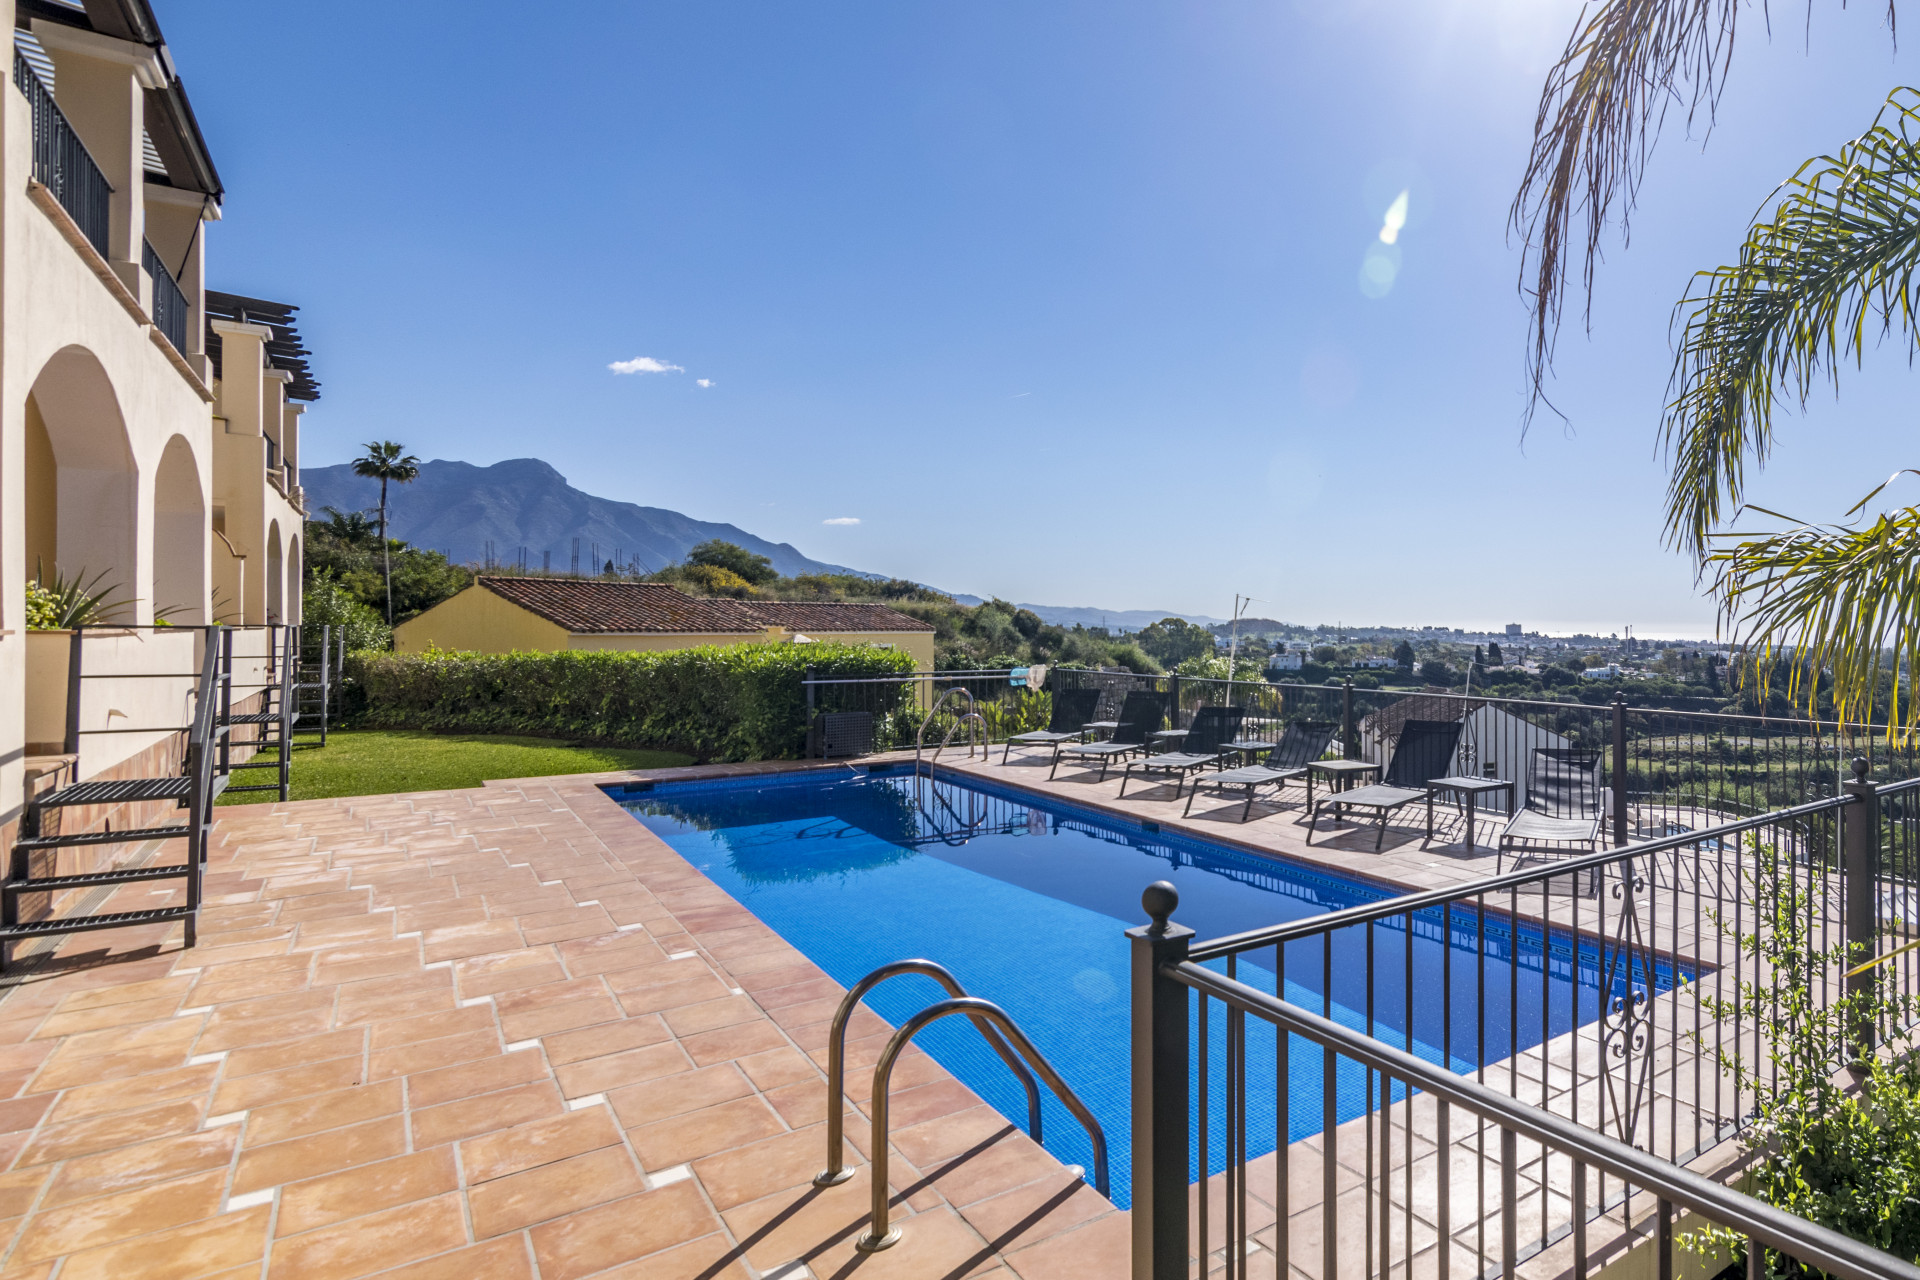 Quality duplex penthouse in Los Almendros, Benahavís with spectacular views to the Mediterranean and the coast